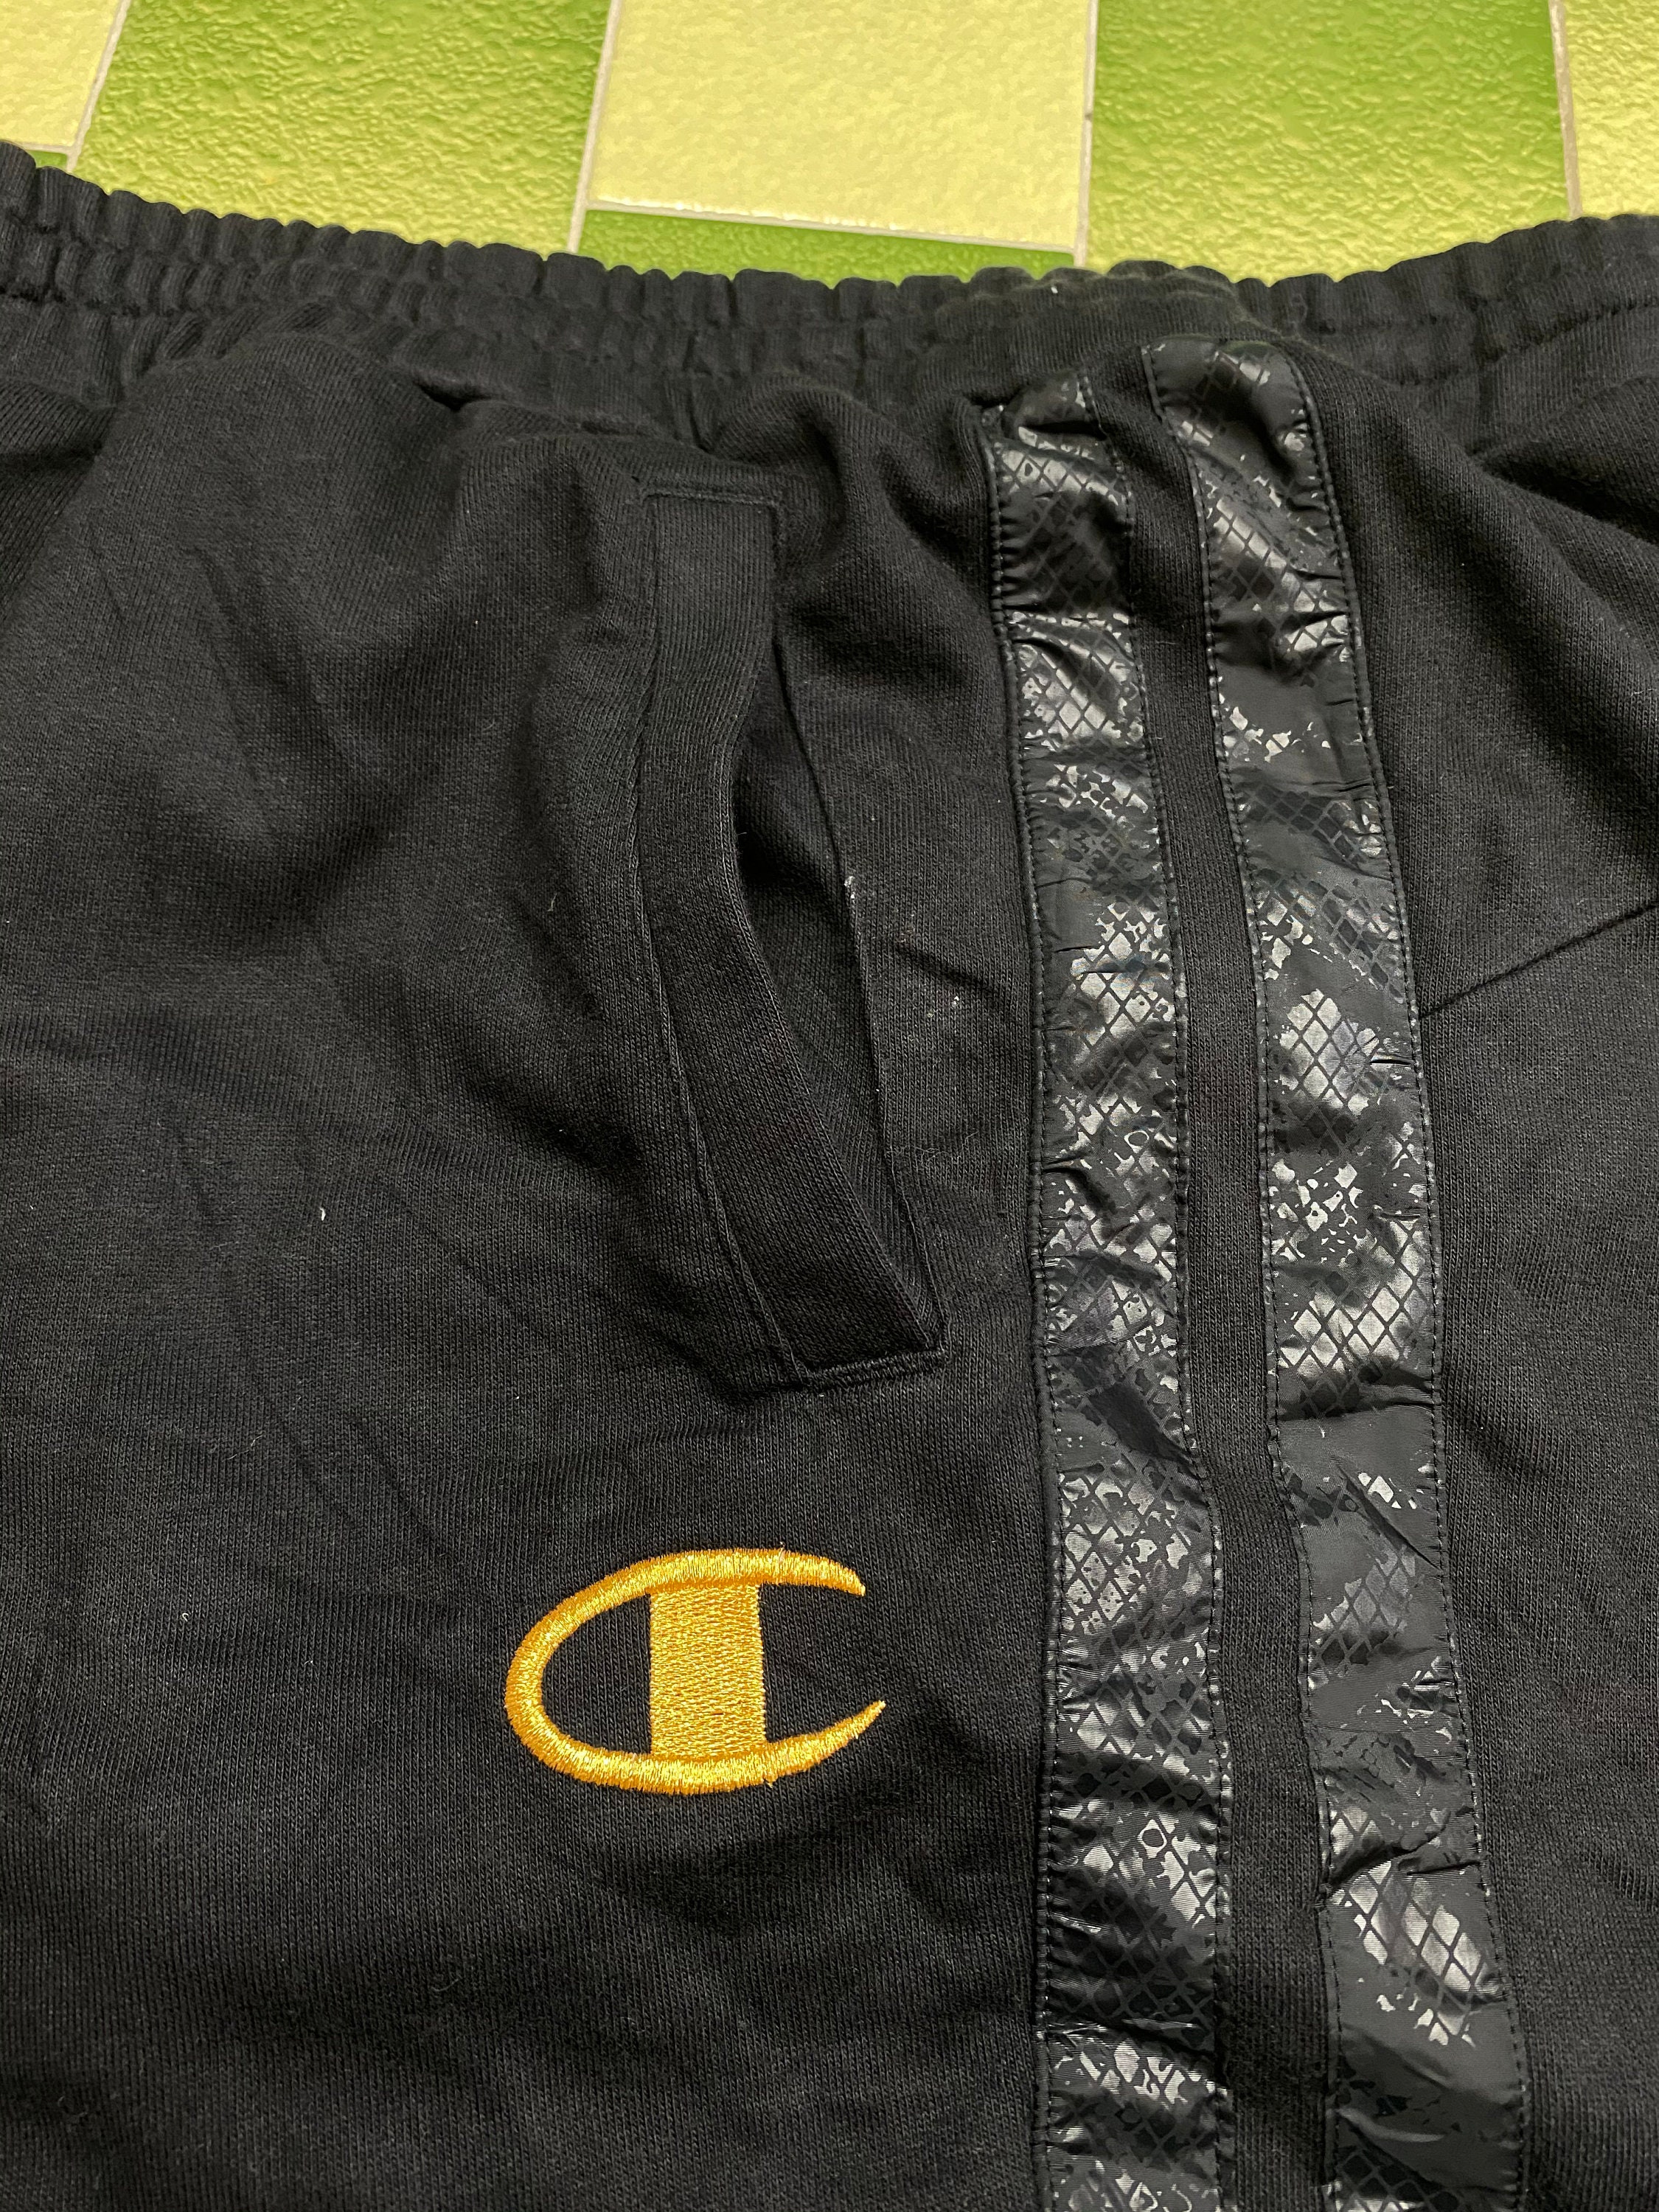 Champion Pants Gold Thread Logo Embriodered Jogger Pants Size | Etsy